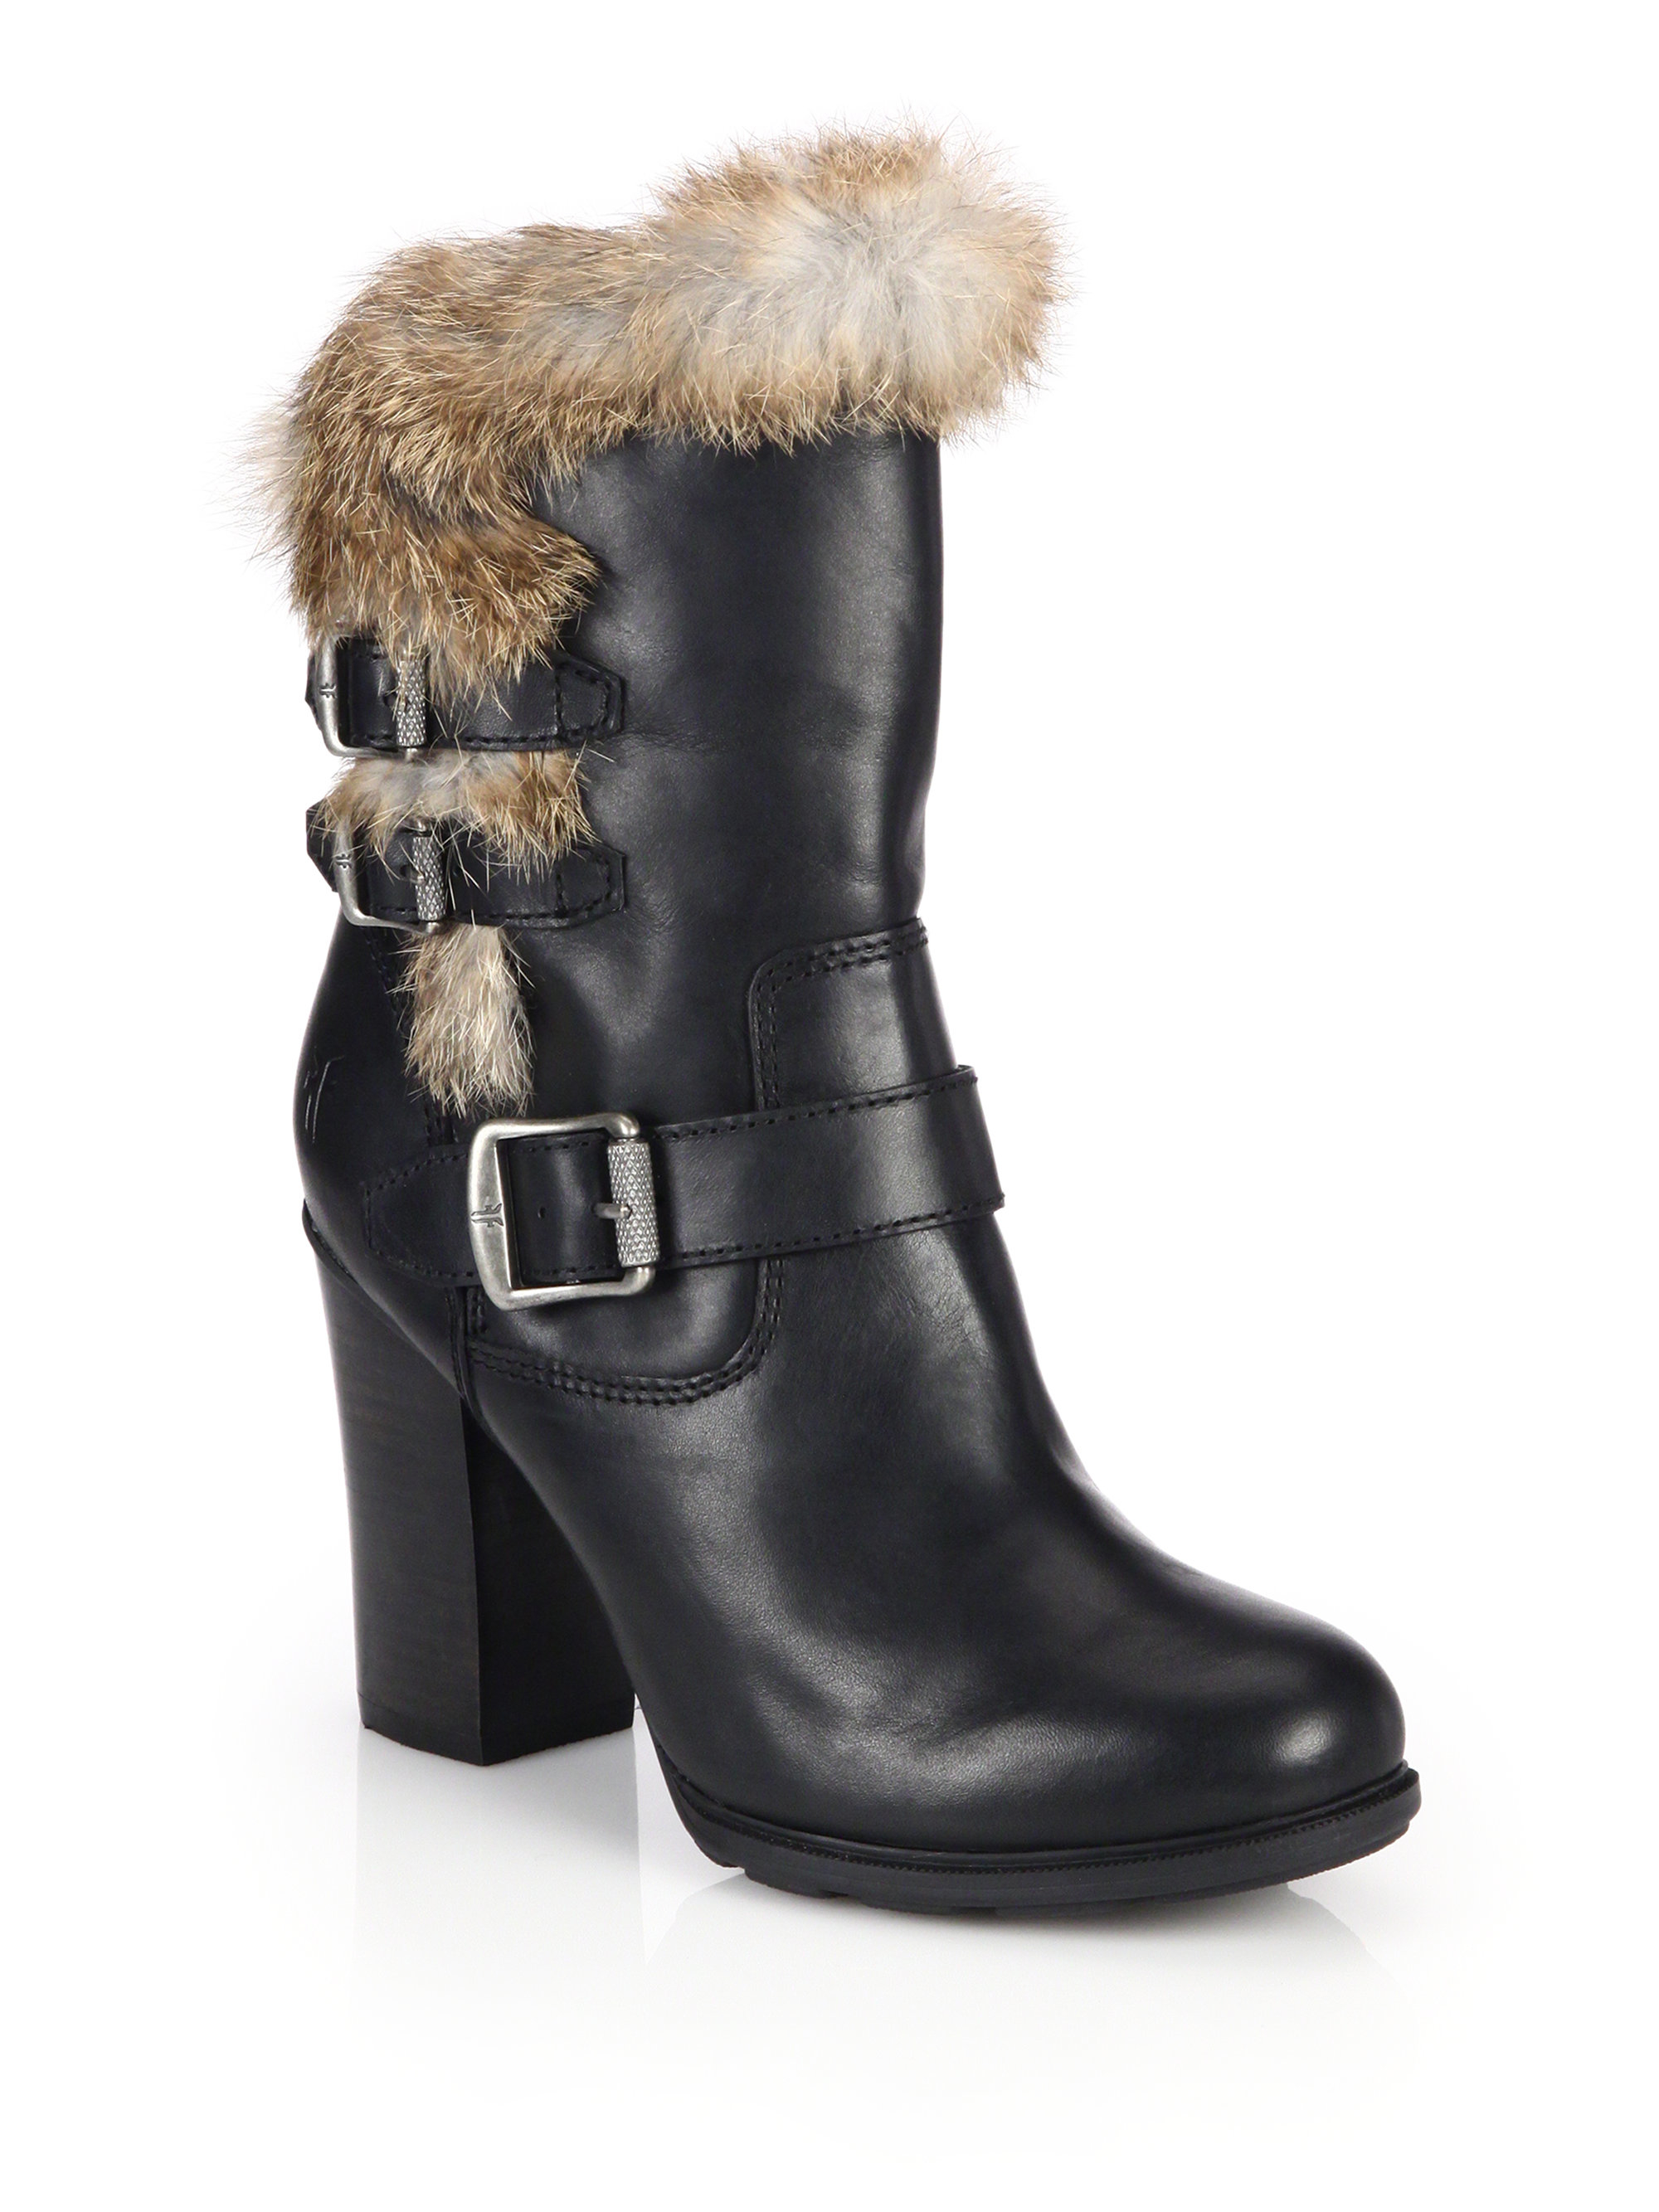 Lyst - Frye Penny Leather & Rabbit Fur Buckled Booties in Black